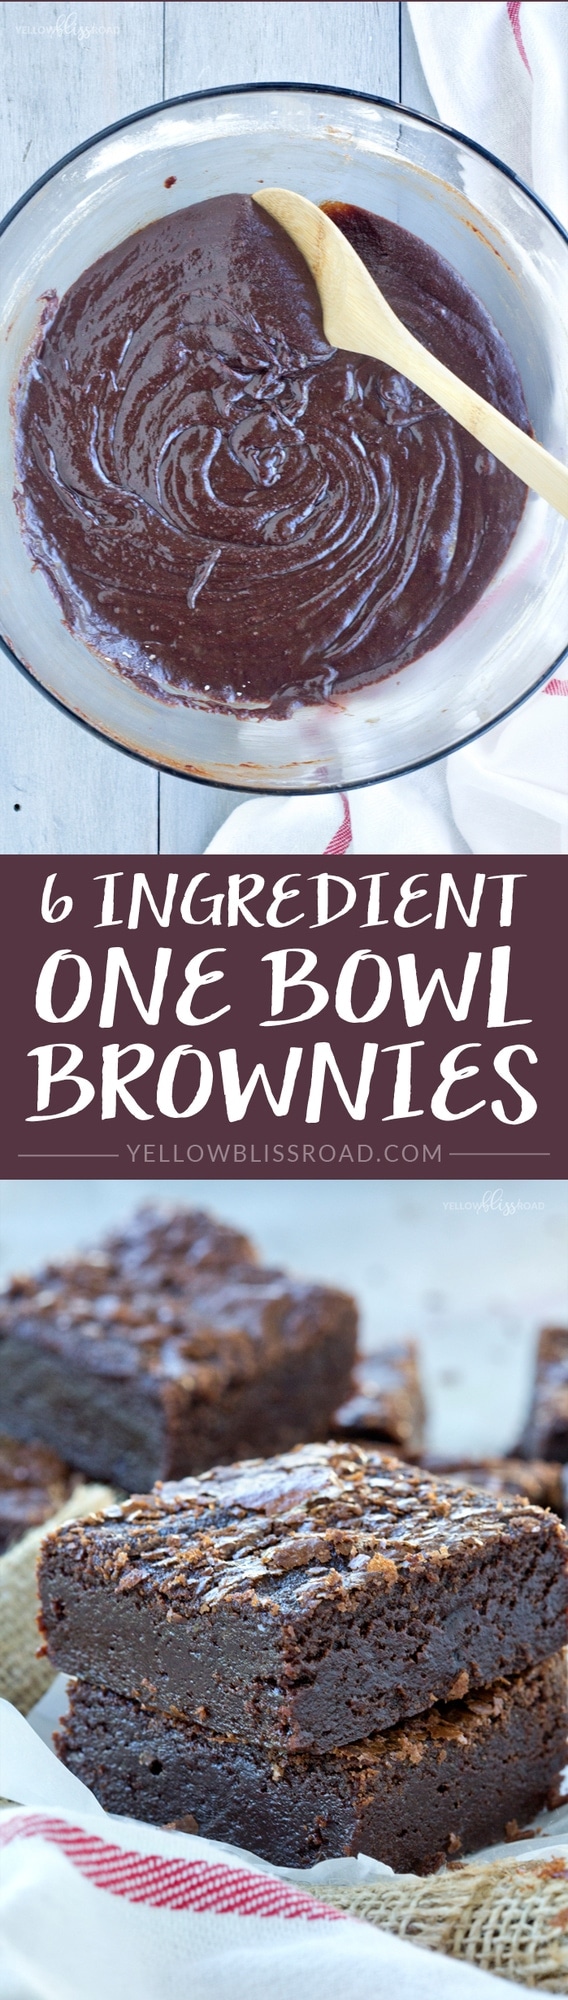 Fudgy and Rich One Bowl Brownies - Super easy and mixed in one bowl for easy clean up!